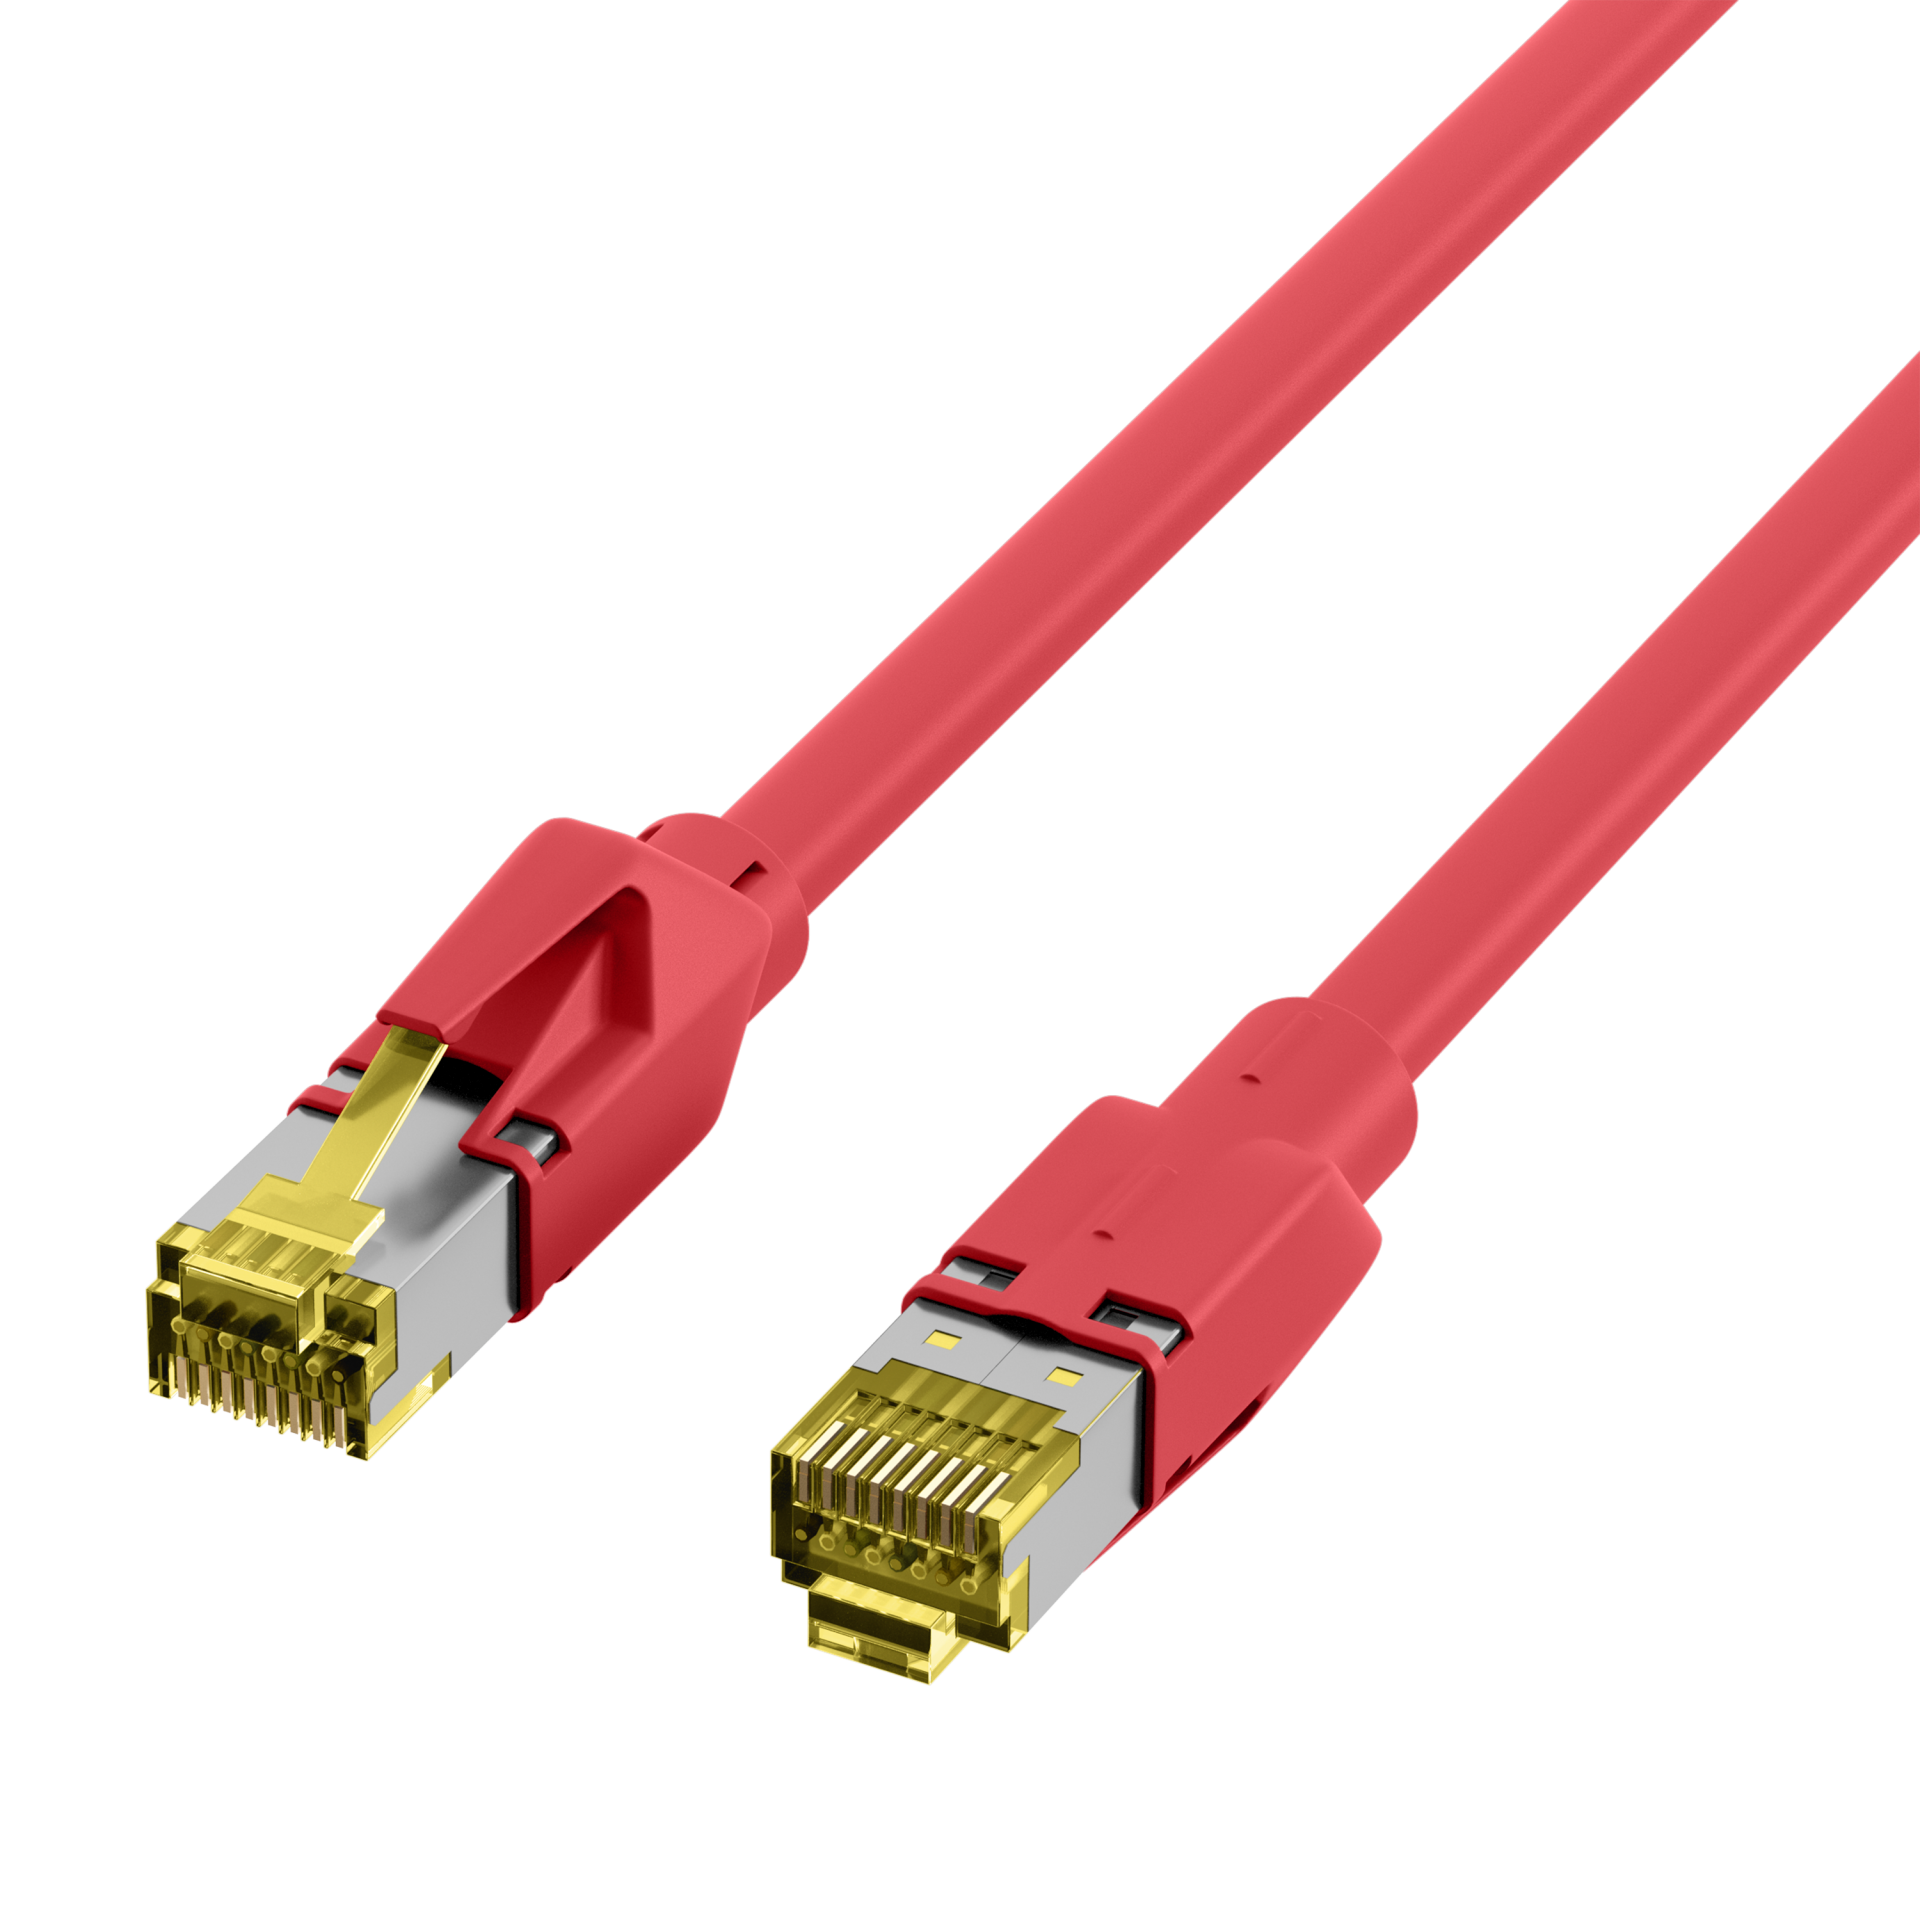 INFRALAN® RJ45 patch cord S/FTP, Cat.6A, TM31, UC900, 10m, red